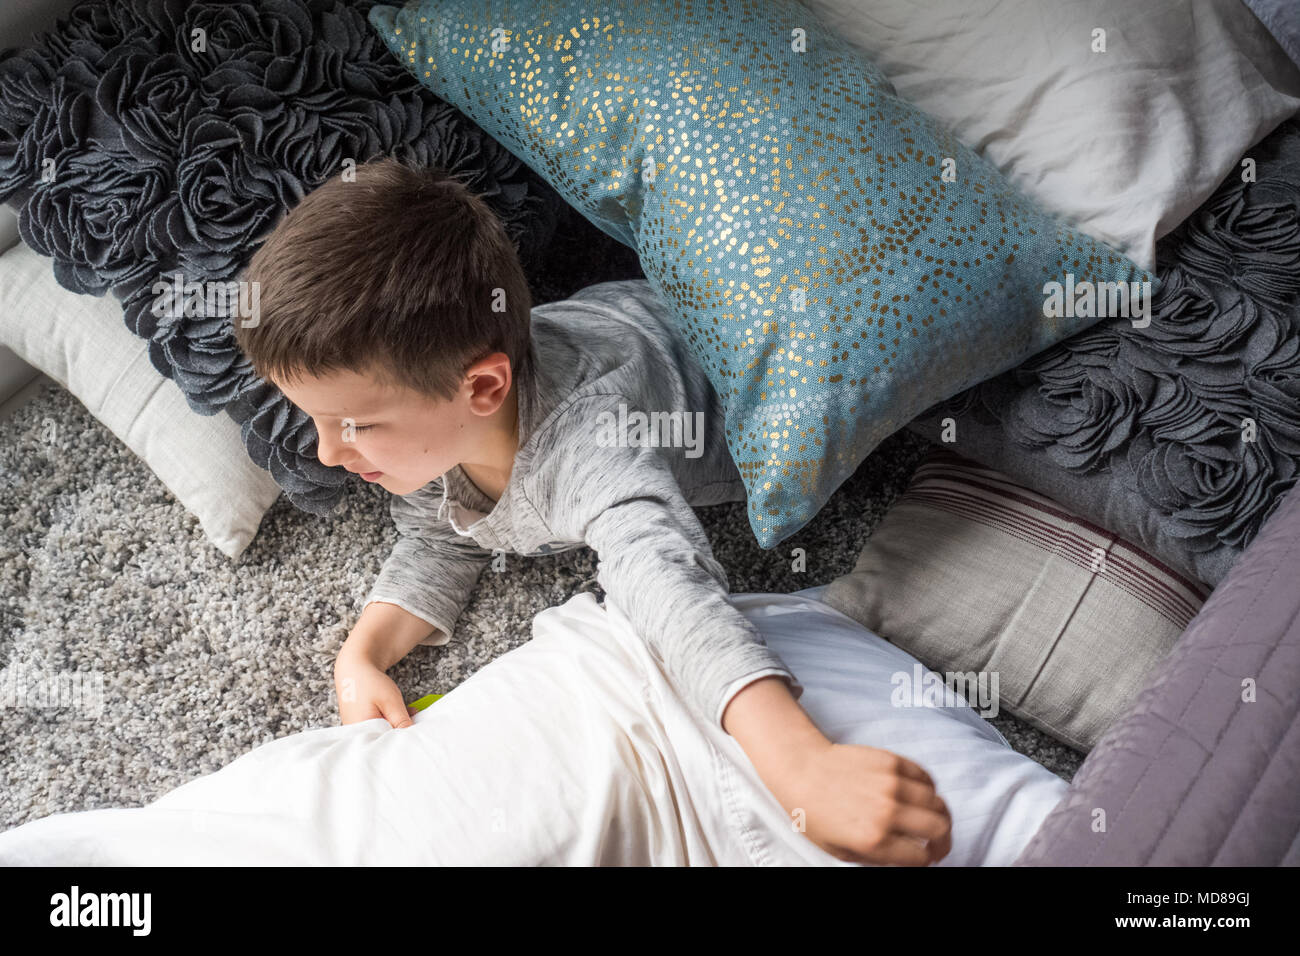 Curious little boy lying on bed Stock Photo